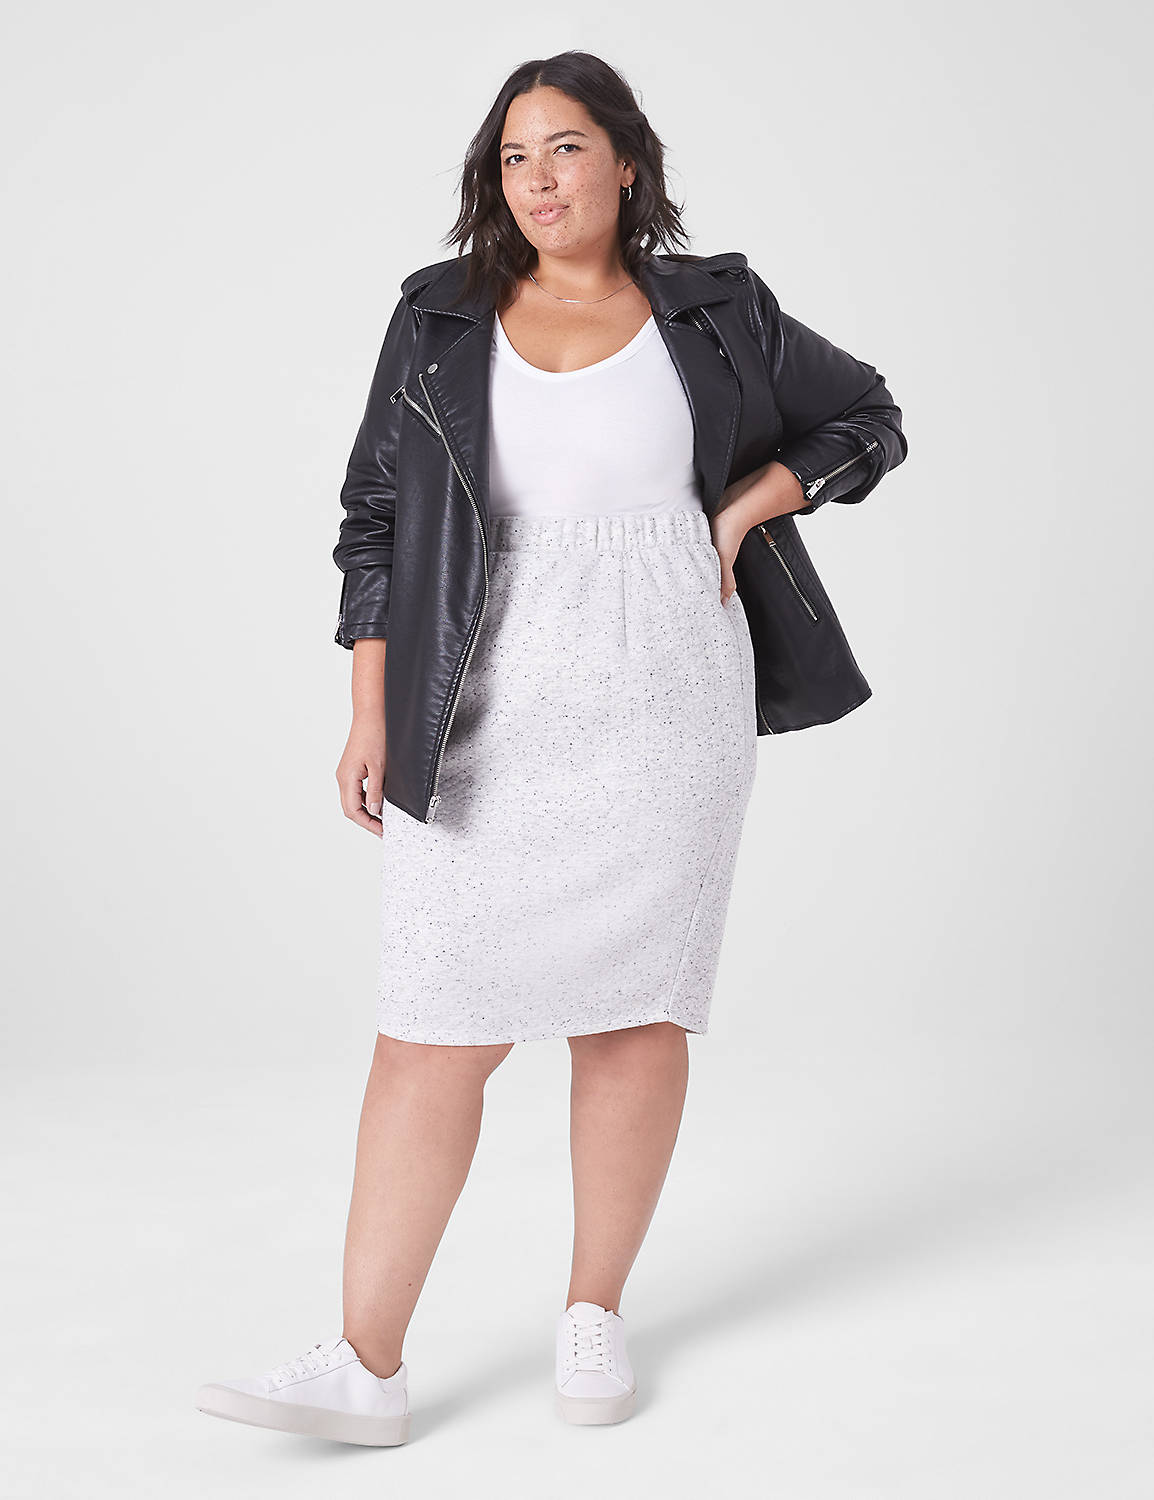 LIVI Mid Rise Quilted Skirt S 11328 Product Image 1